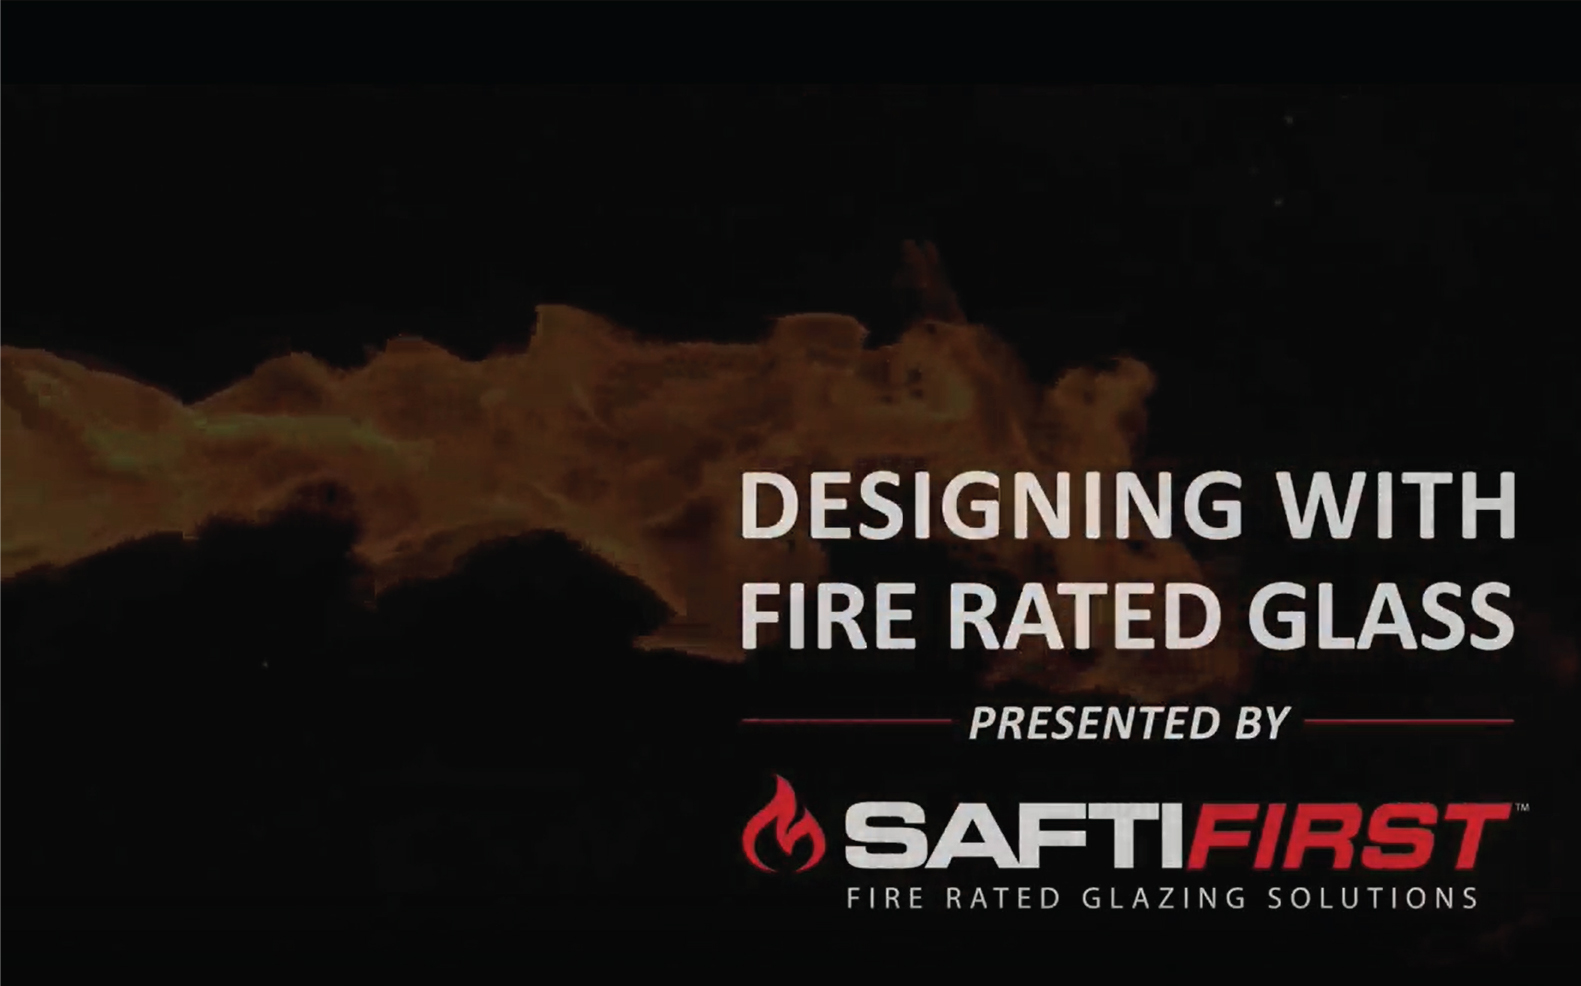 Designing with Fire Rated Glass